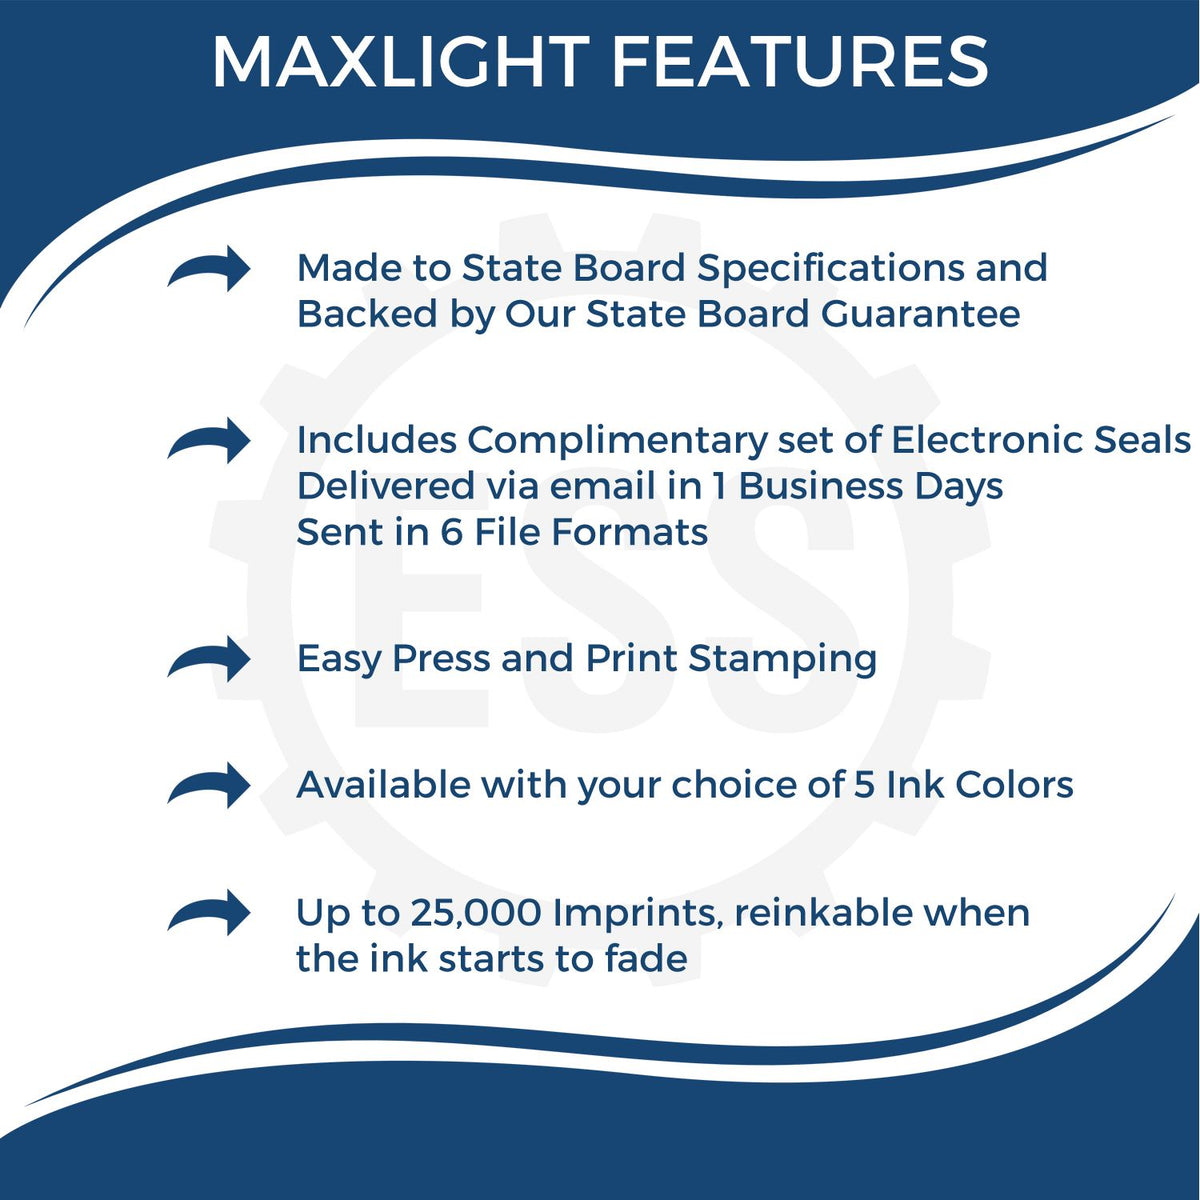 A picture of an infographic highlighting the selling points for the Premium MaxLight Pre-Inked Minnesota Landscape Architectural Stamp